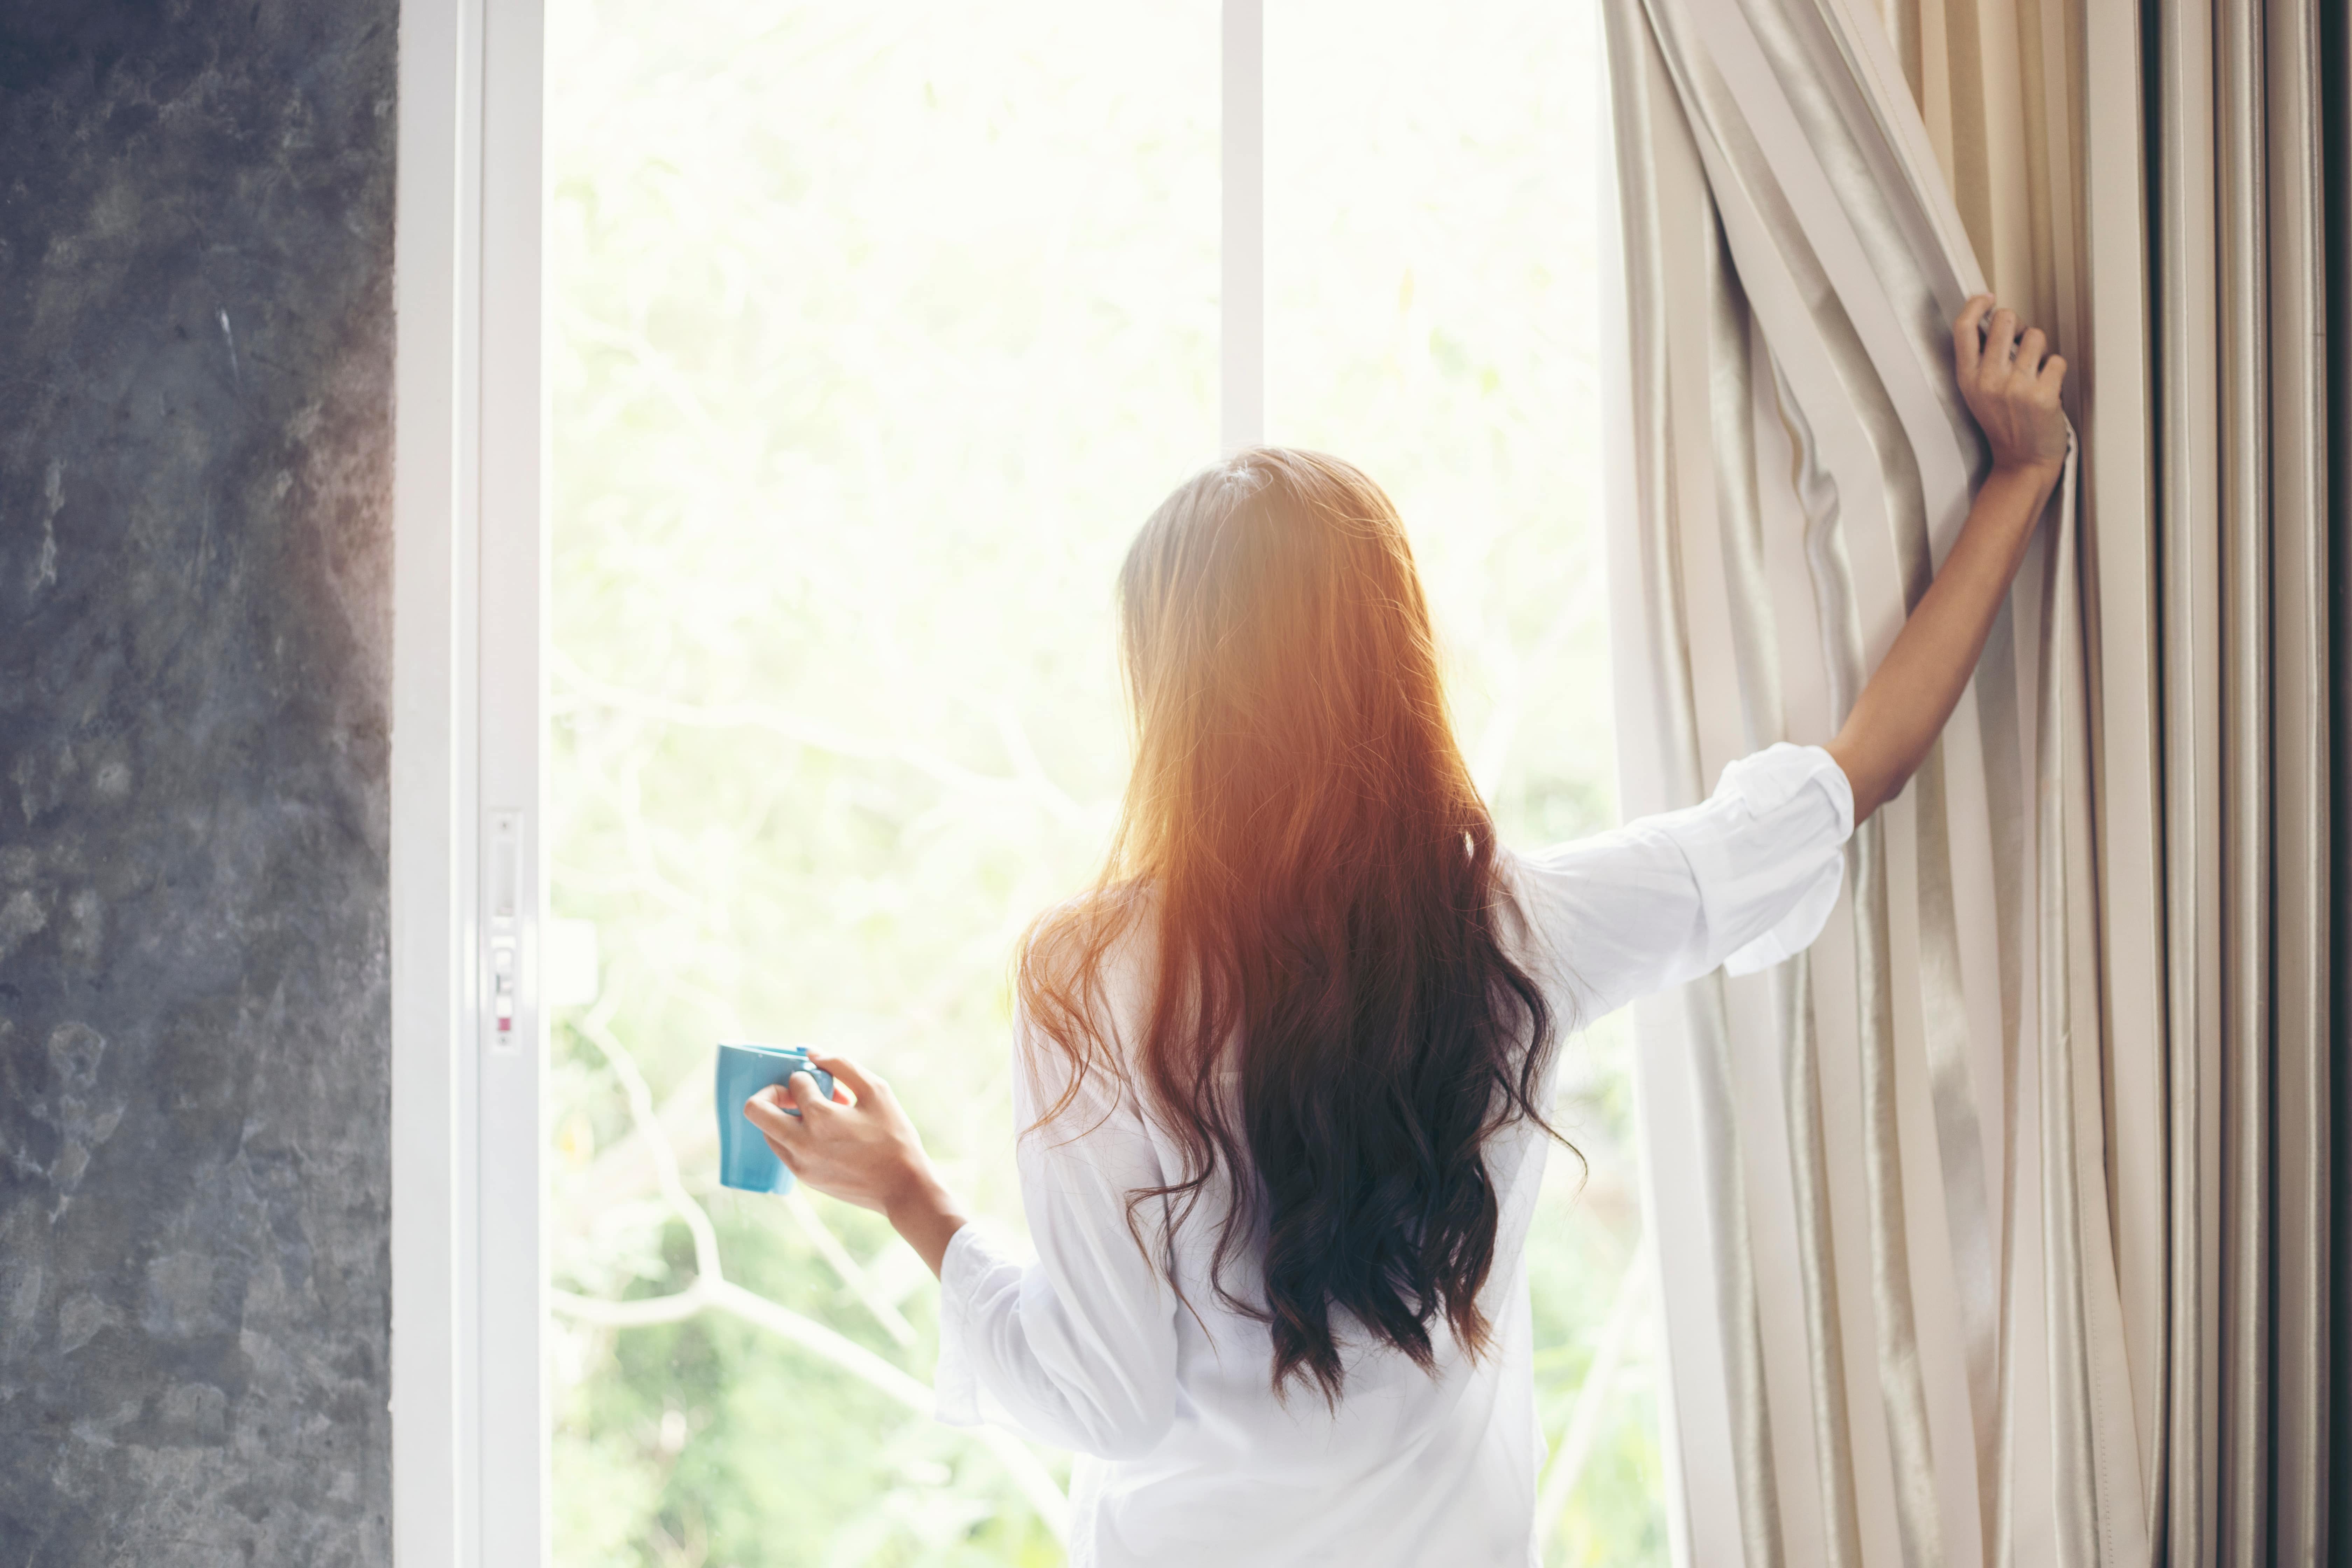 Woman opening the curtains on patio doors to bright sunshine and holding a mug.